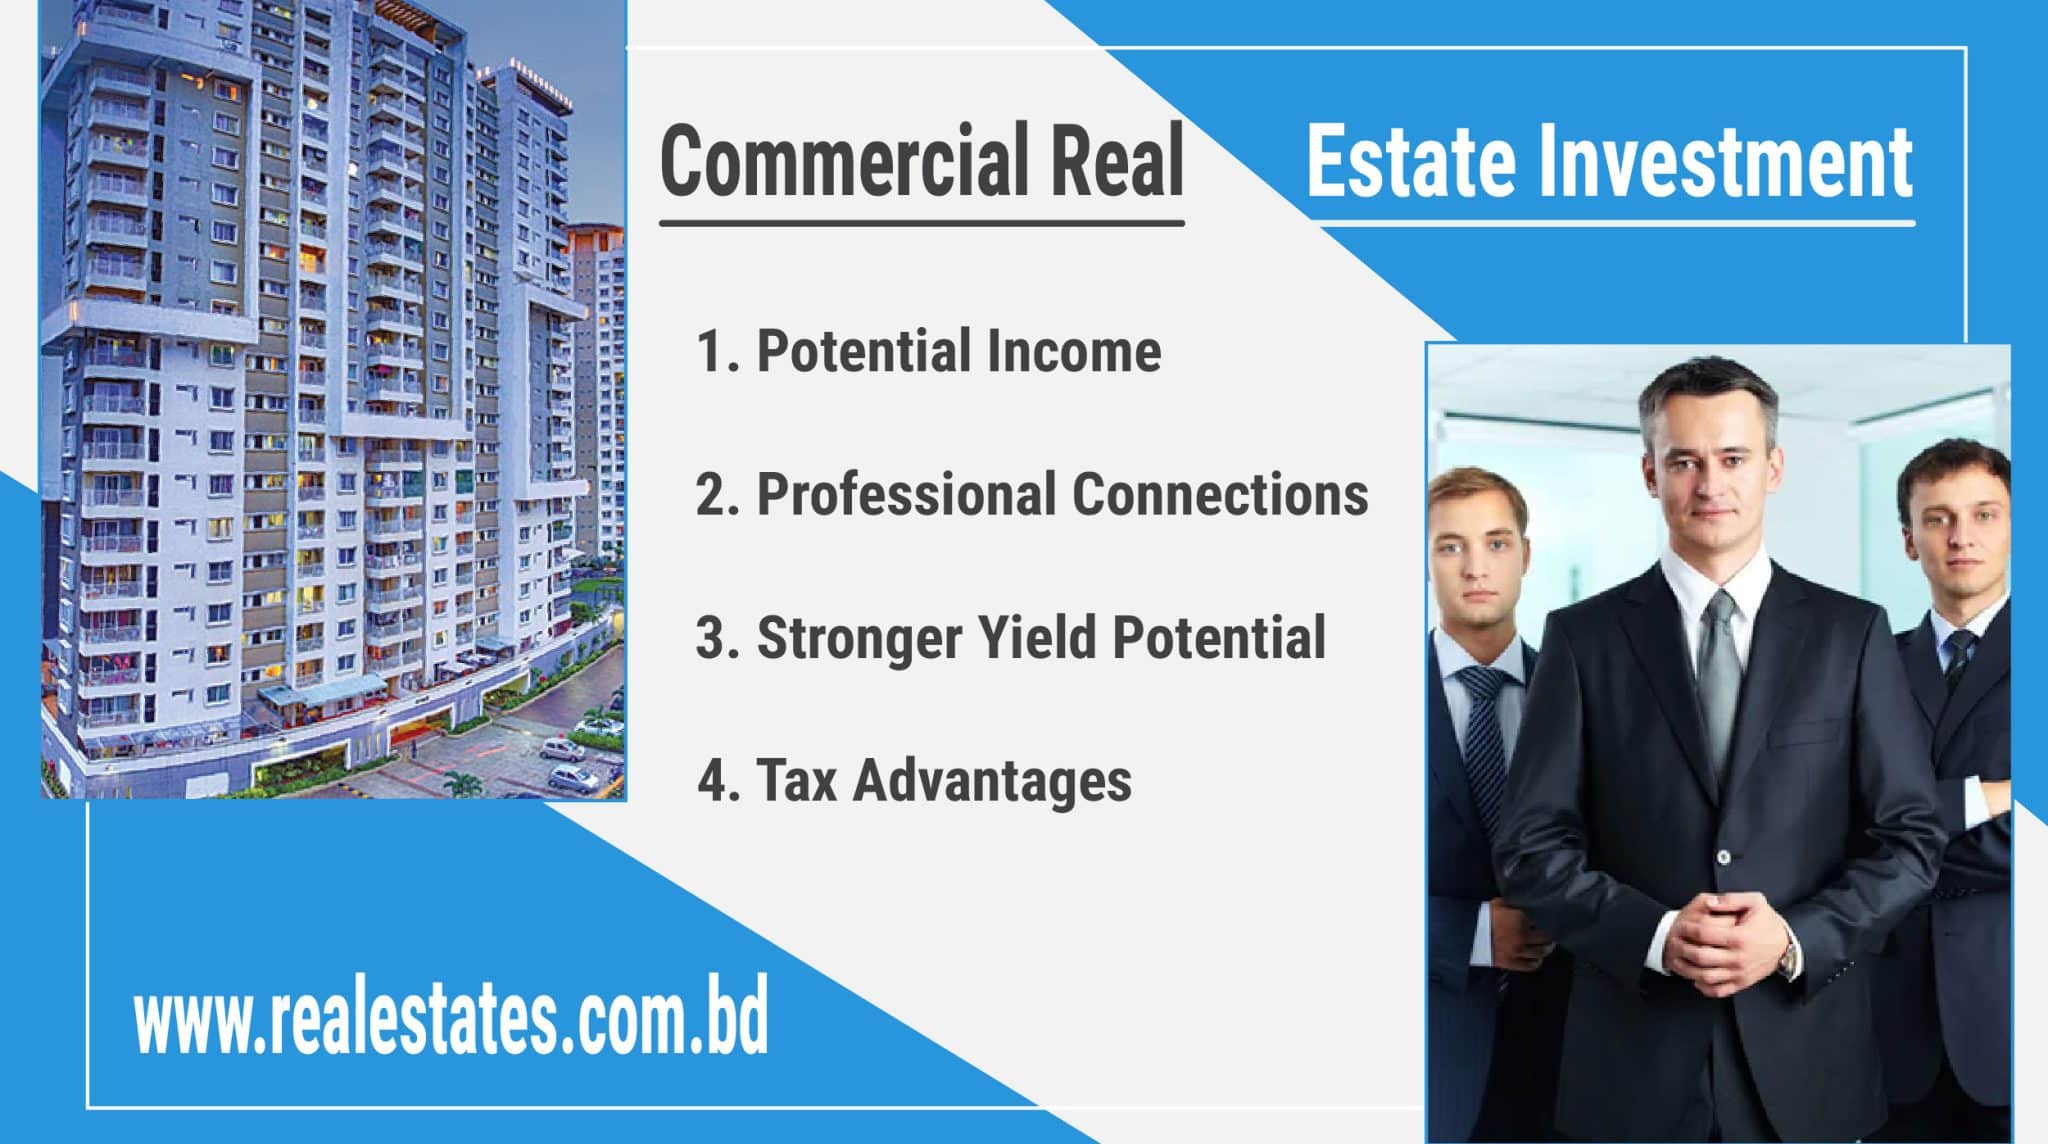 Realestate-Commercial-Real-Estate-Investment